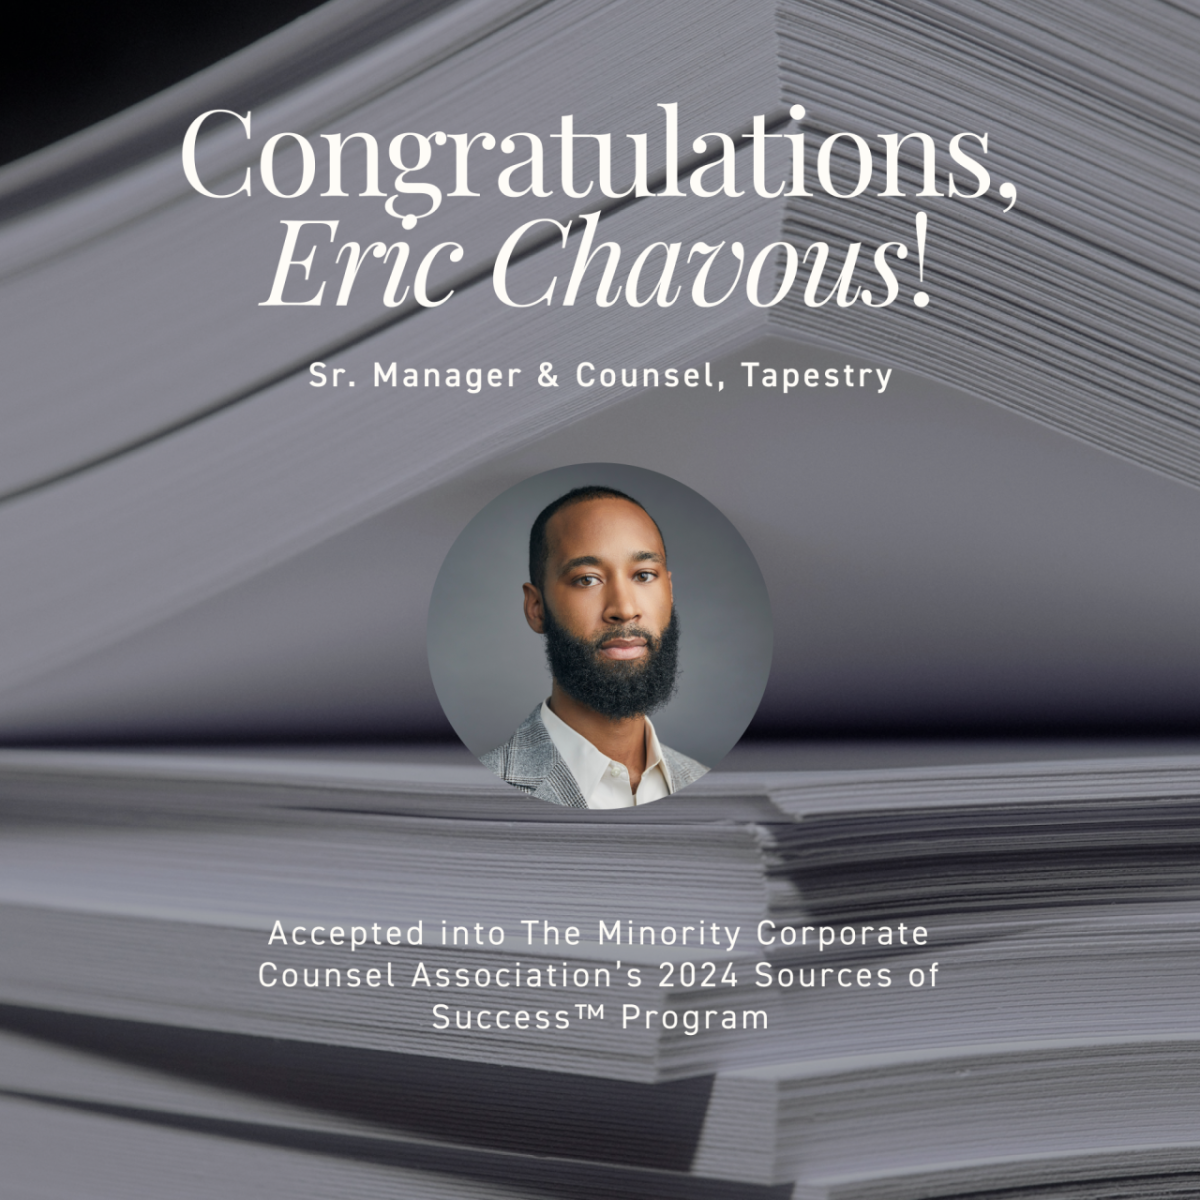 Photo of Eric Chavous, a Black man with a beard wearing a grey suit coat and white shirt, with the text Congratulations to Eric Chavous, Sr. Manager & Counsel, Tapestry, on his acceptance into The Minority Corporate Counsel Association’s 2024 Sources of Success™ Program 